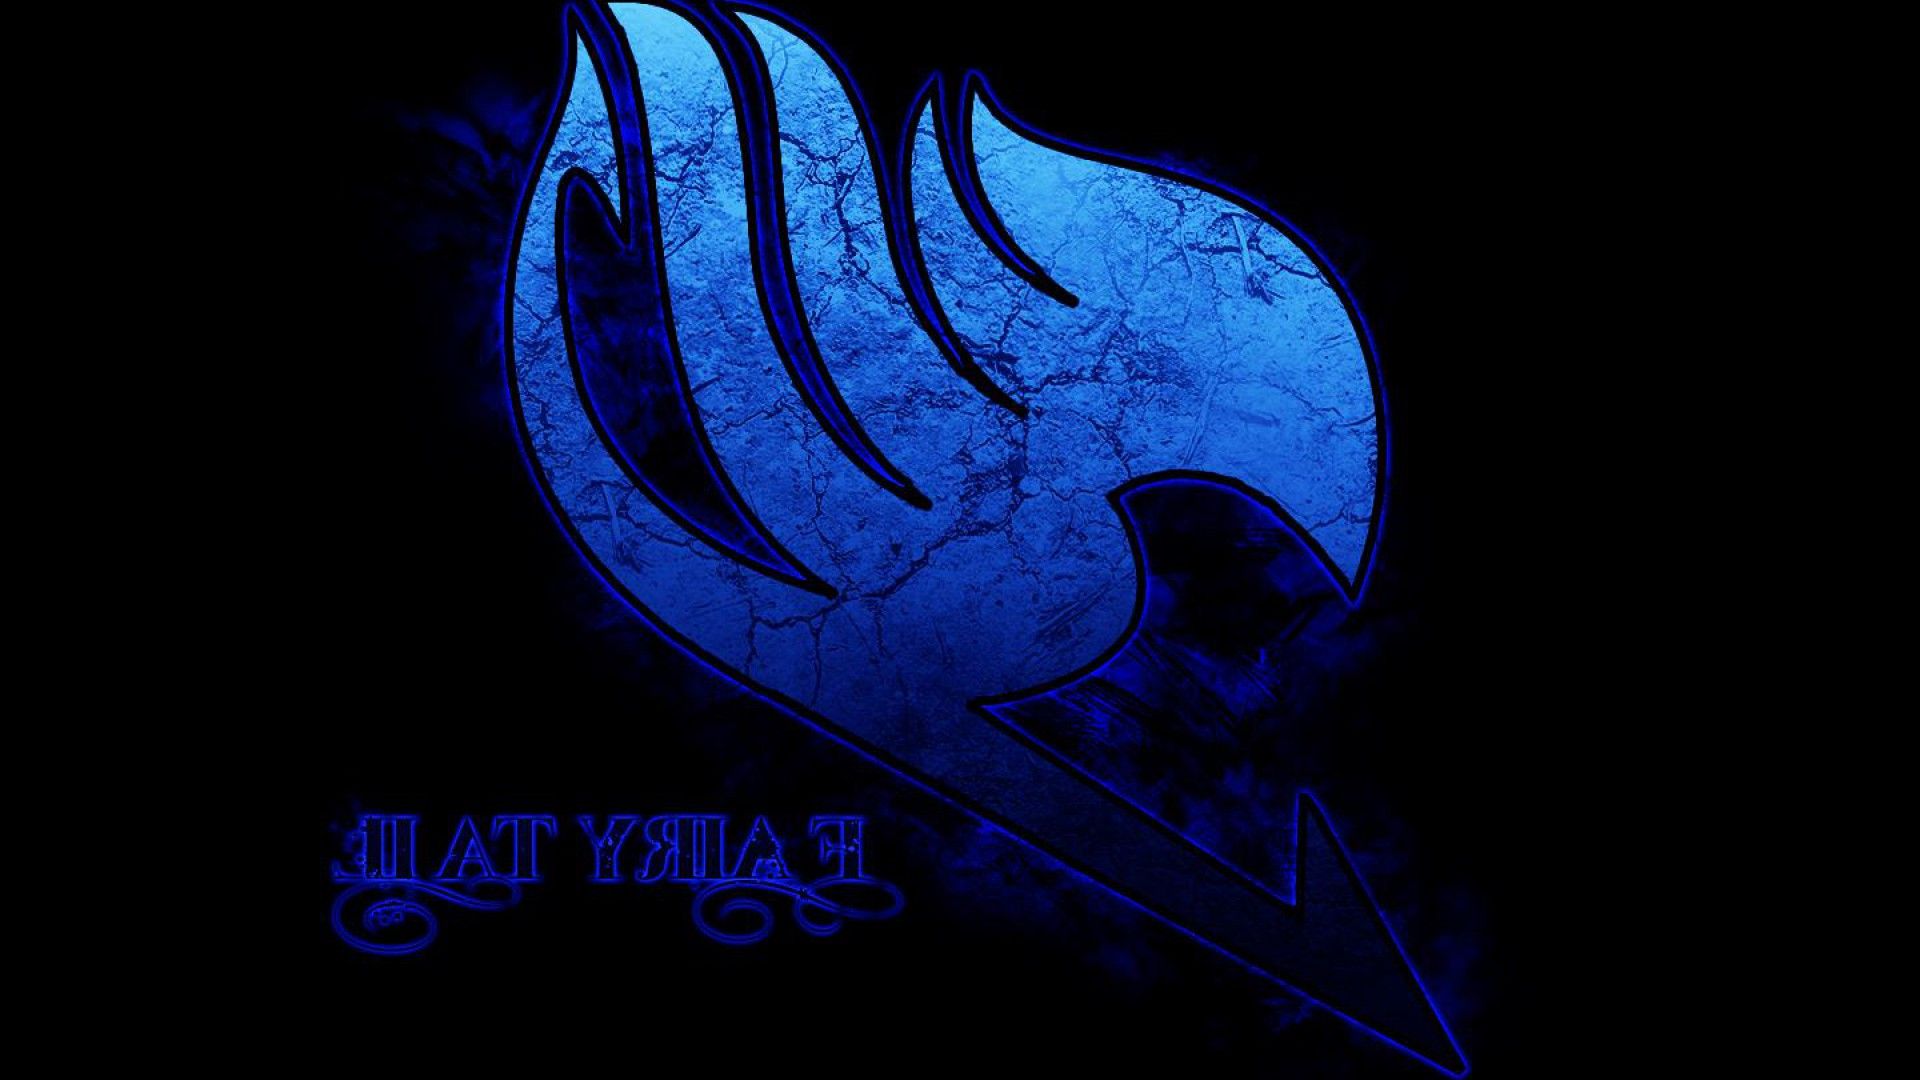 Free Download Wallpapers For Fairy Tail Logo Wallpaper 19x1080 19x1080 For Your Desktop Mobile Tablet Explore 49 Fairy Tail Symbol Wallpaper Fairy Tail Wallpaper Fairy Tail Erza Wallpaper Fairy